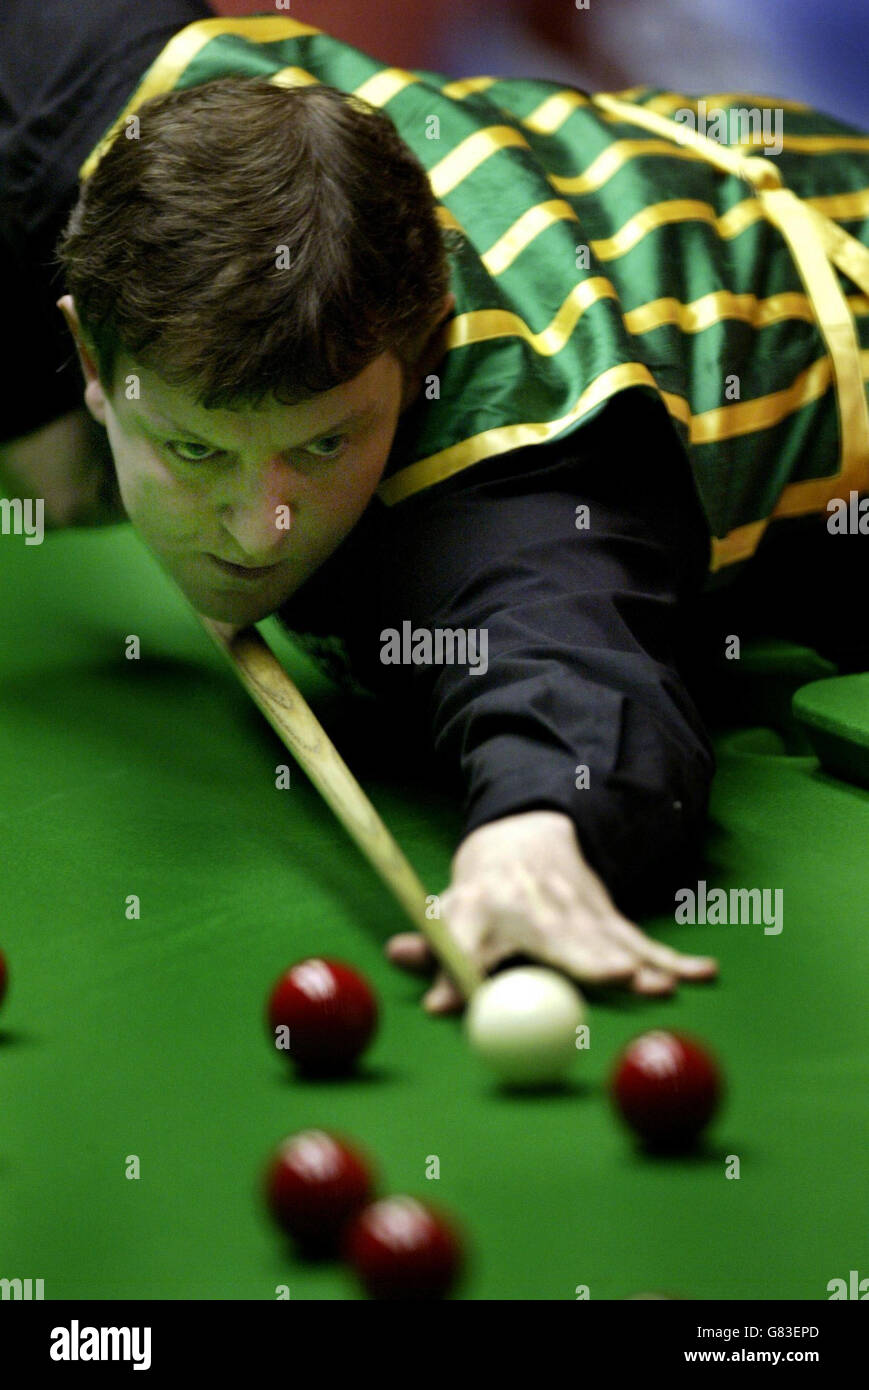 Snooker - Embassy World Championship 2005 - First Round - Barry Pinches v Ken Doherty - The Crucible